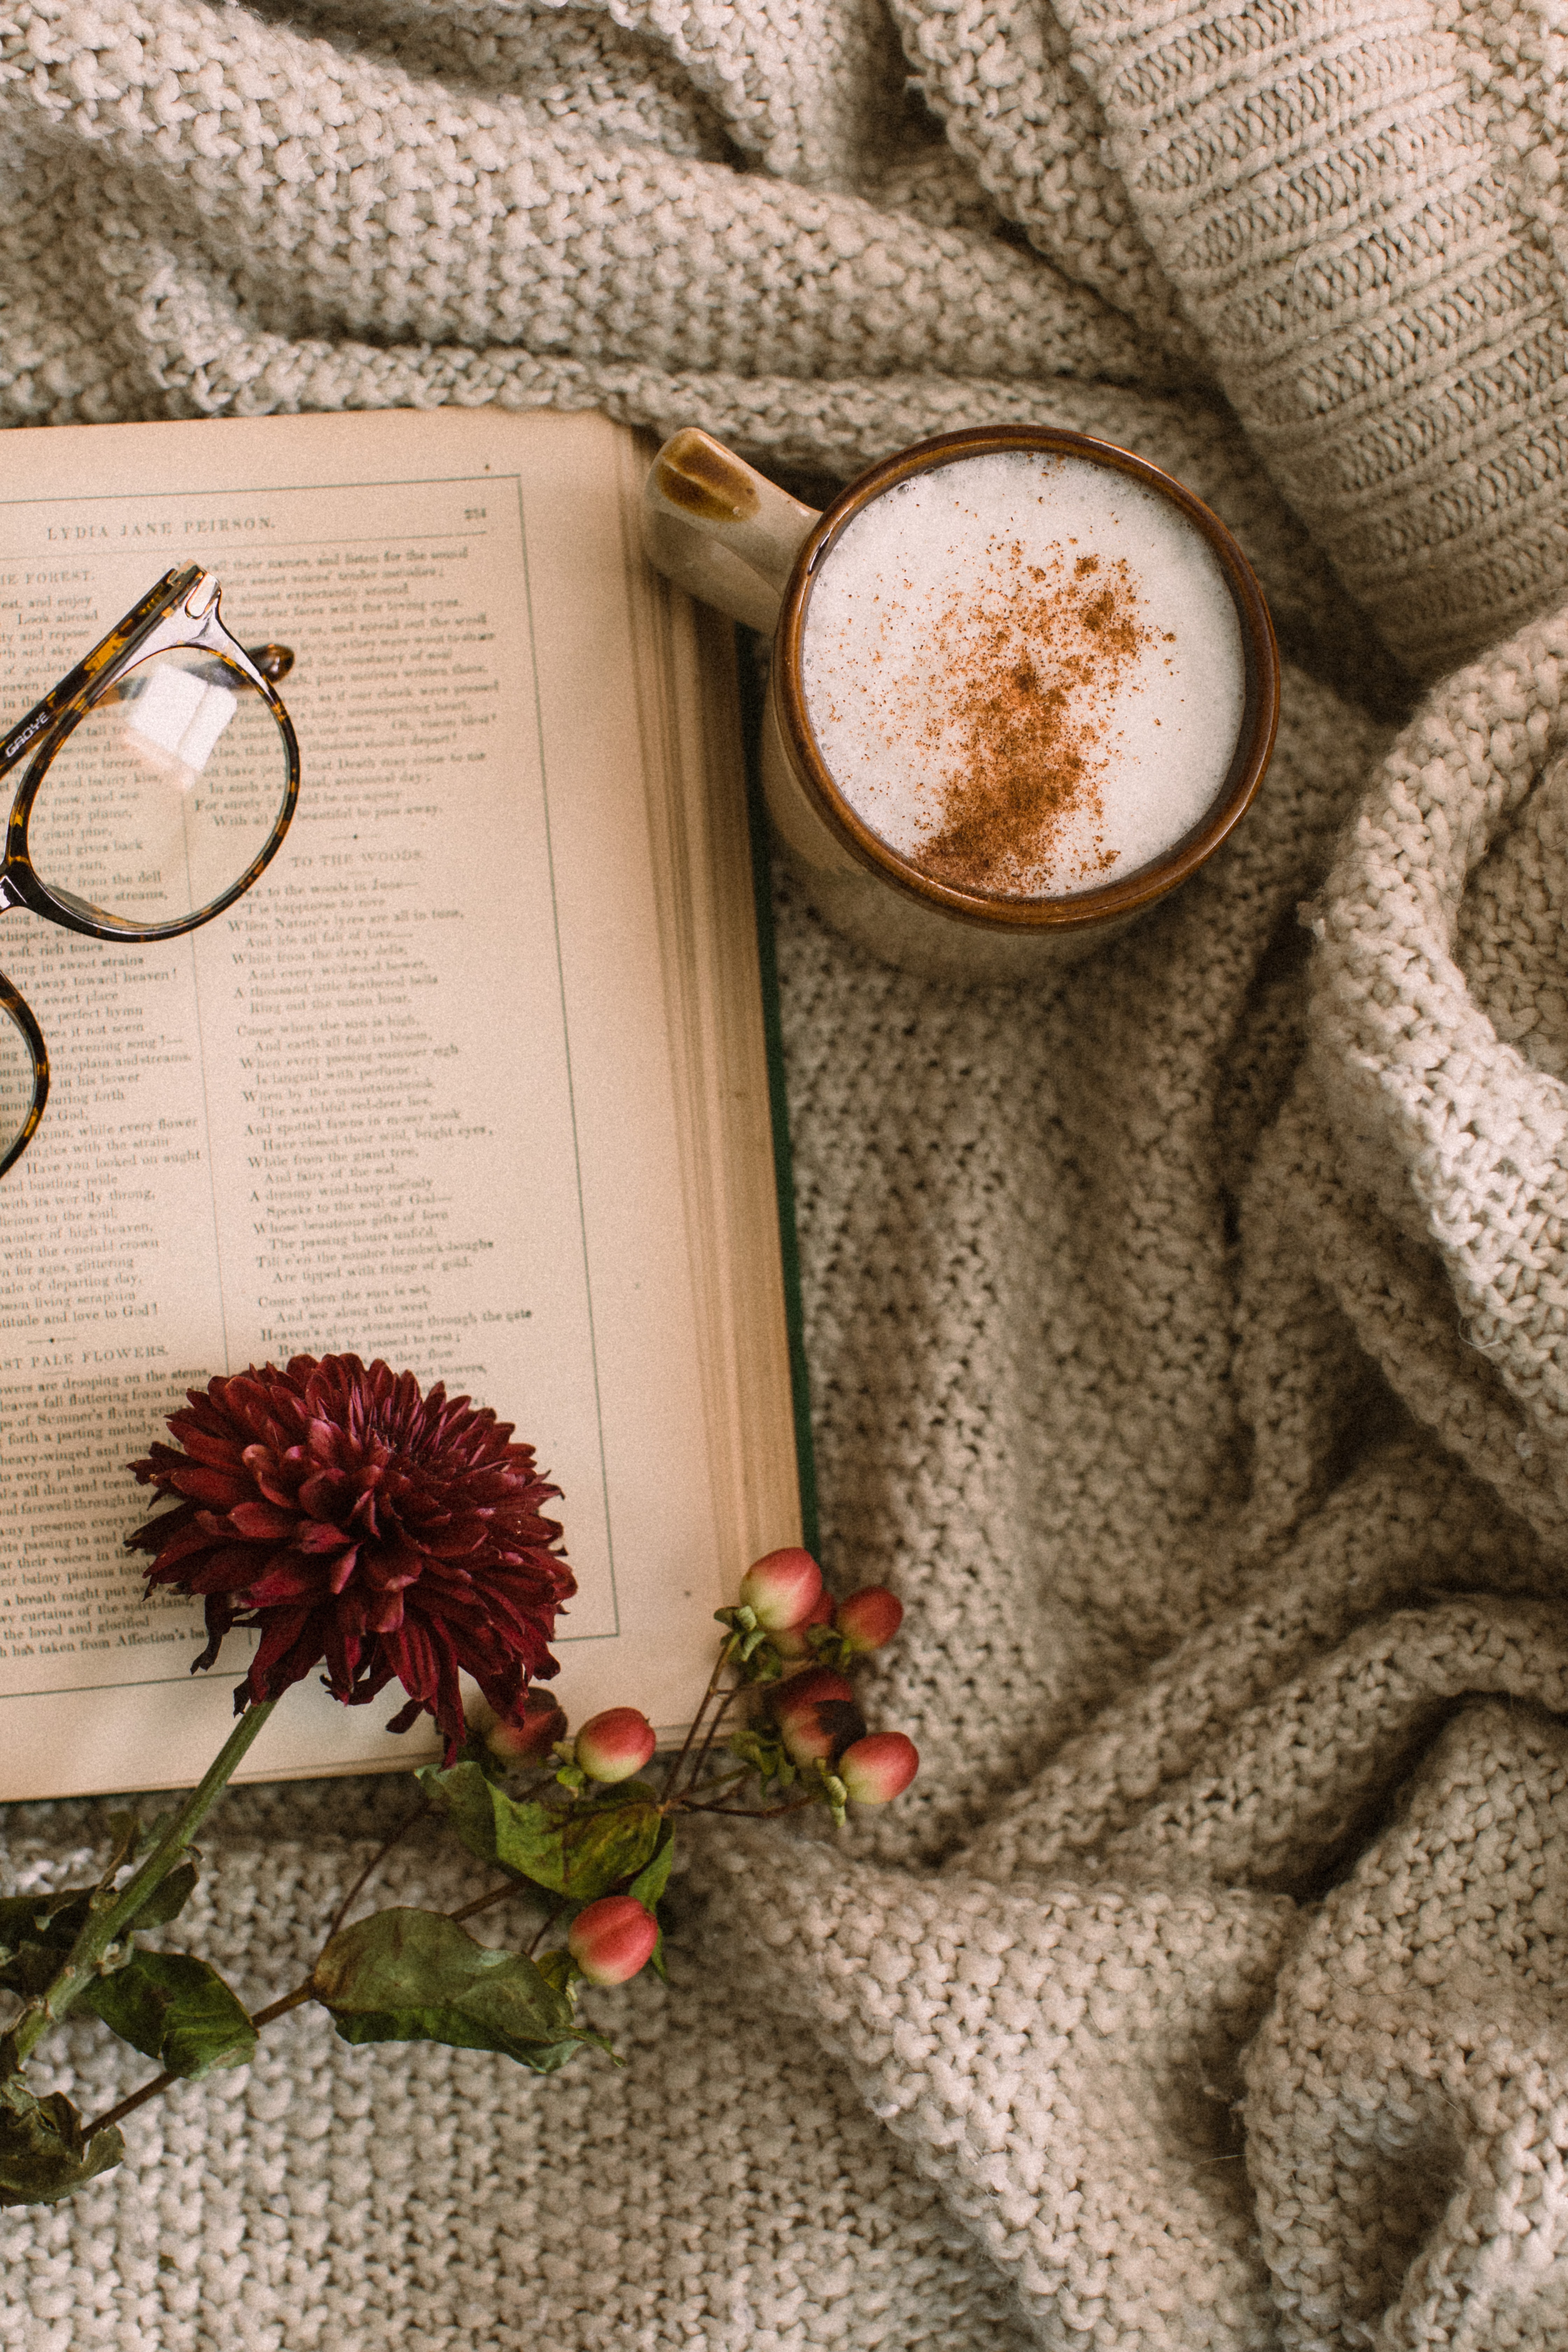 cup, book, food, flowers, coffee, cappuccino, glasses, spectacles, mug images